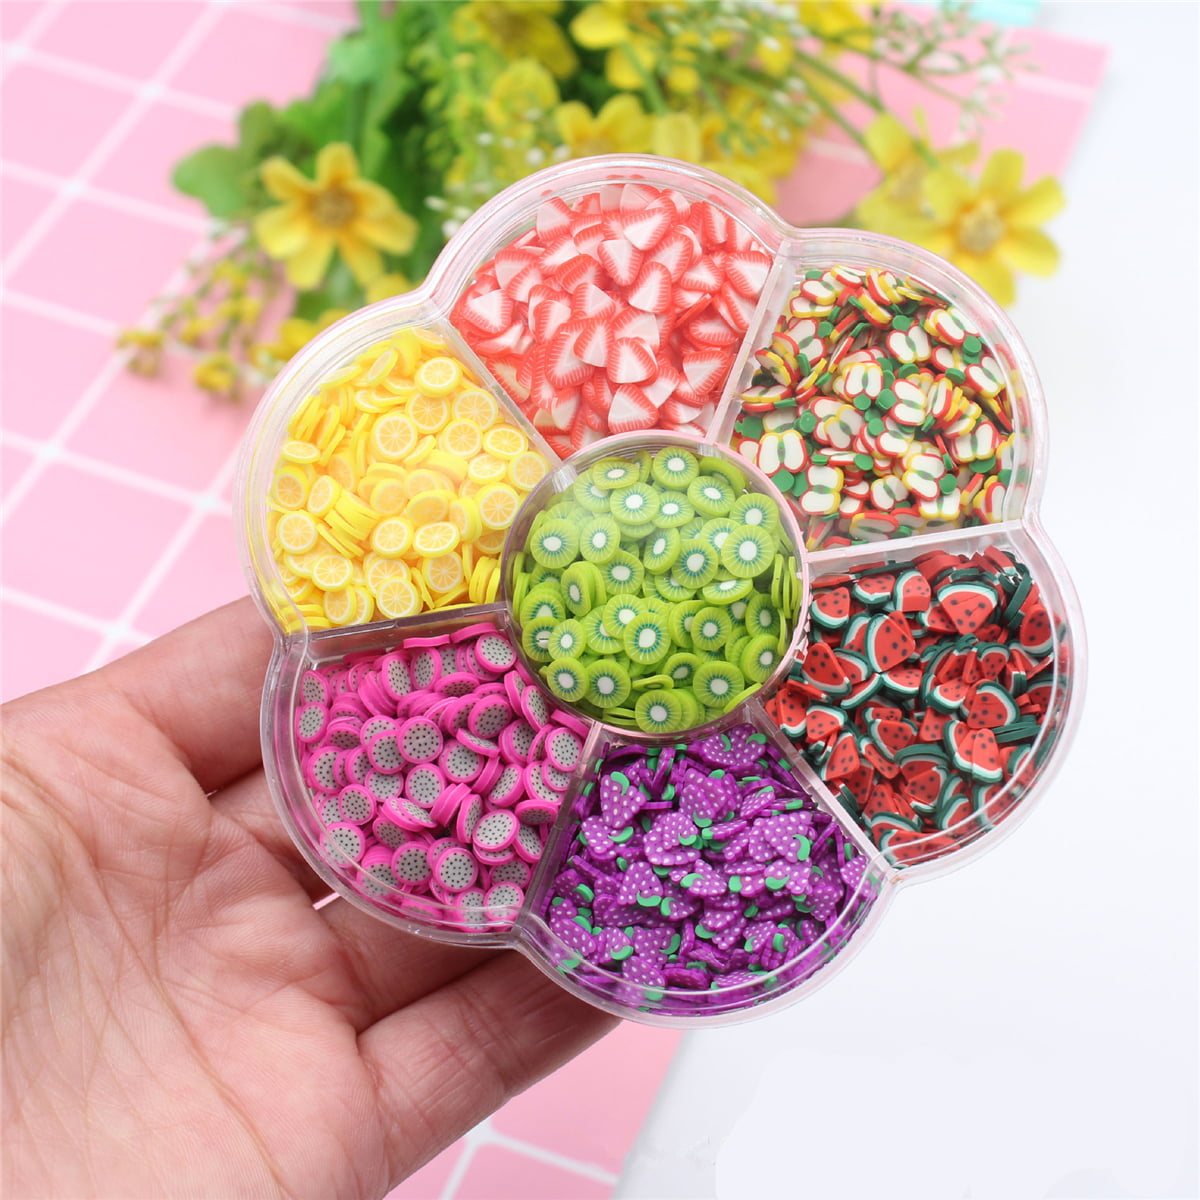 100PCS DIY Slime Accessories Decor Fruit Cake Flower Polymer Clay Toy  Ornament –